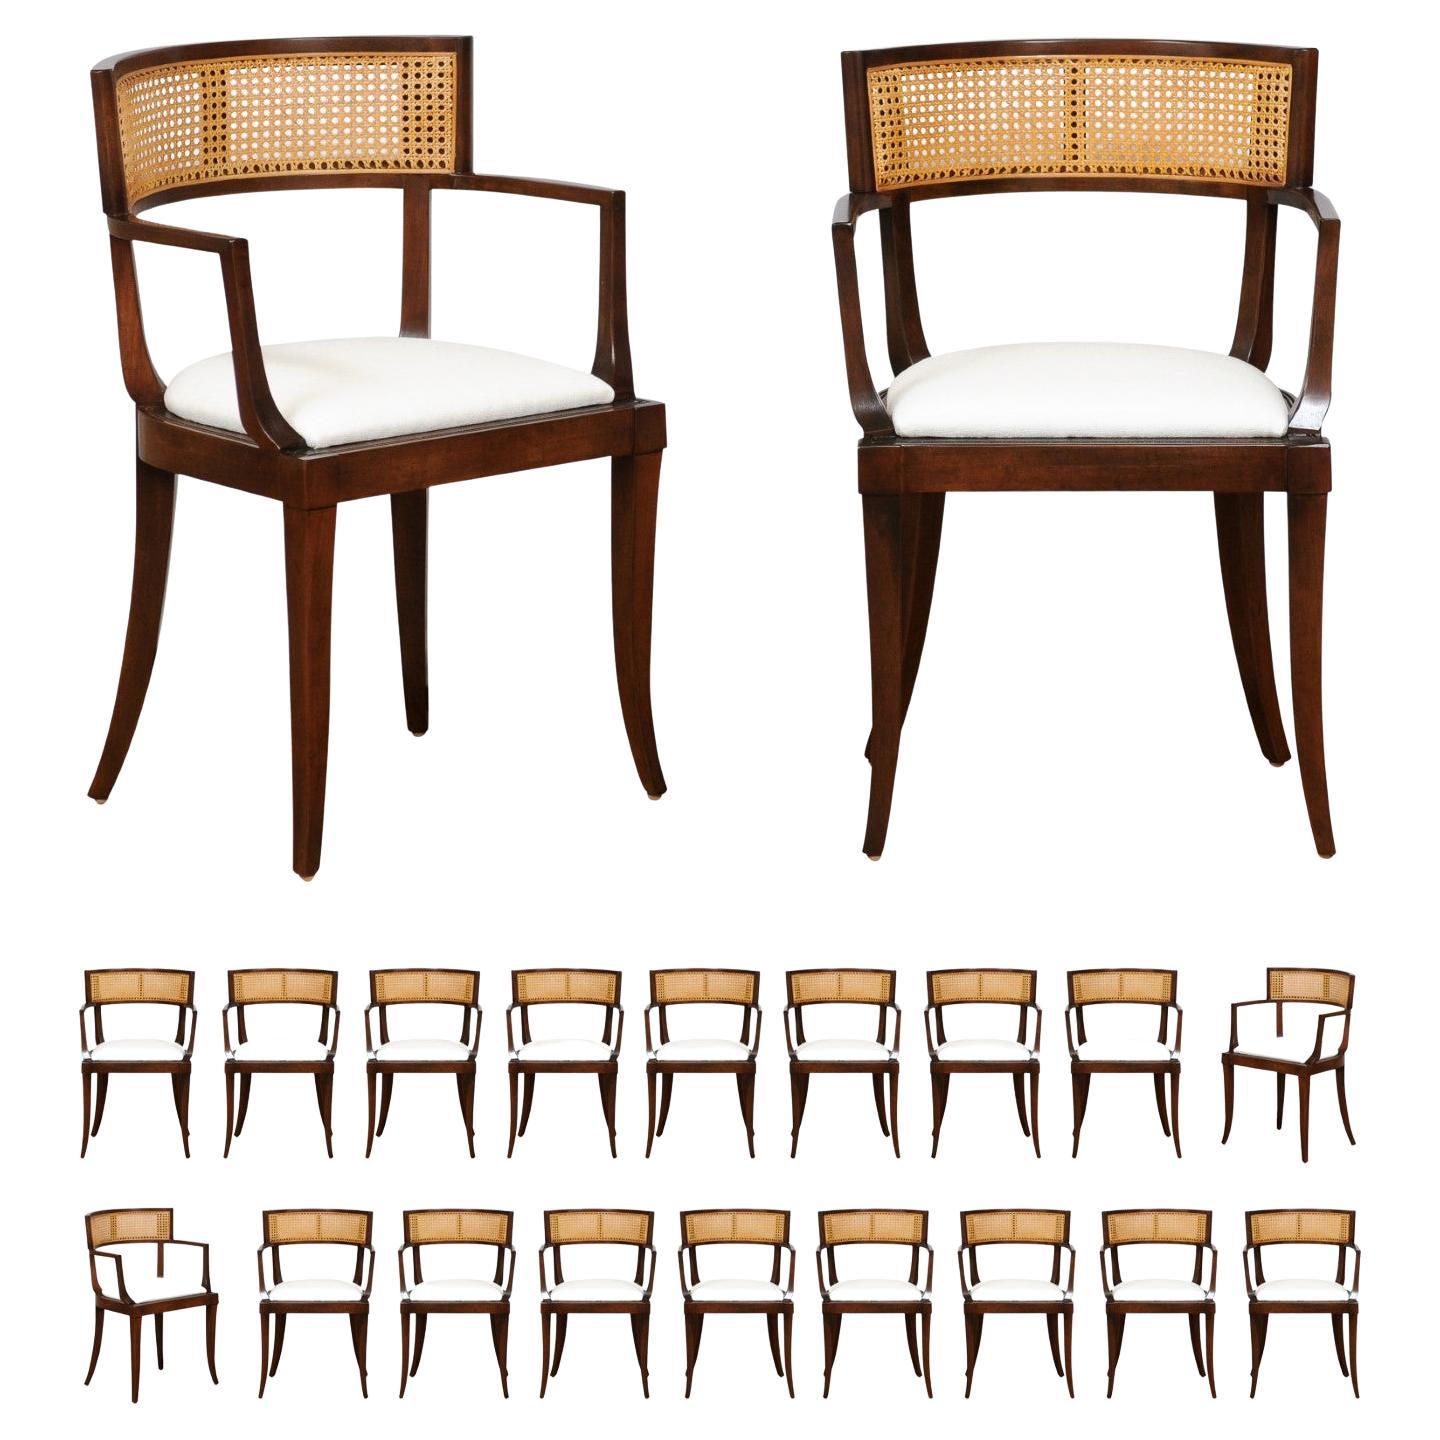 All Arms, Exquisite Set of 20 Klismos Cane Dining Chairs by Baker, circa 1958 For Sale